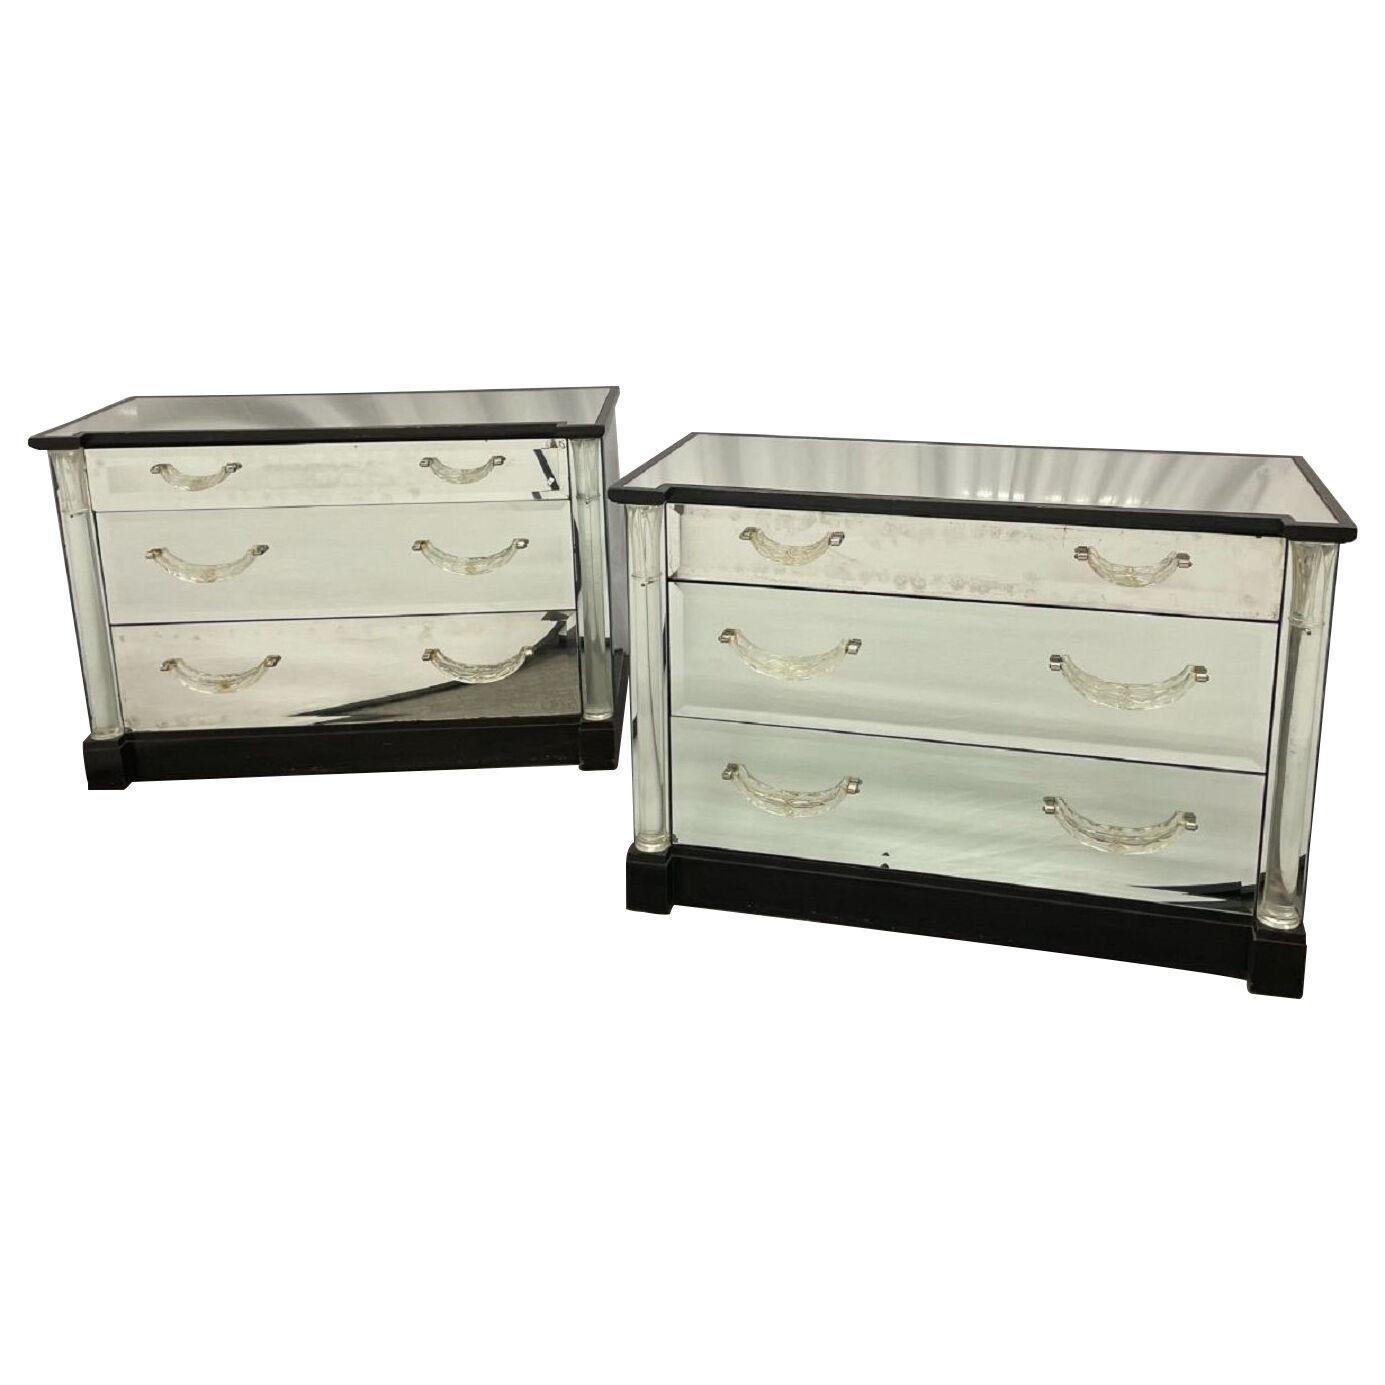 Pair of Grosfeld House Mirrored Commodes / Cabinets / Nightstands